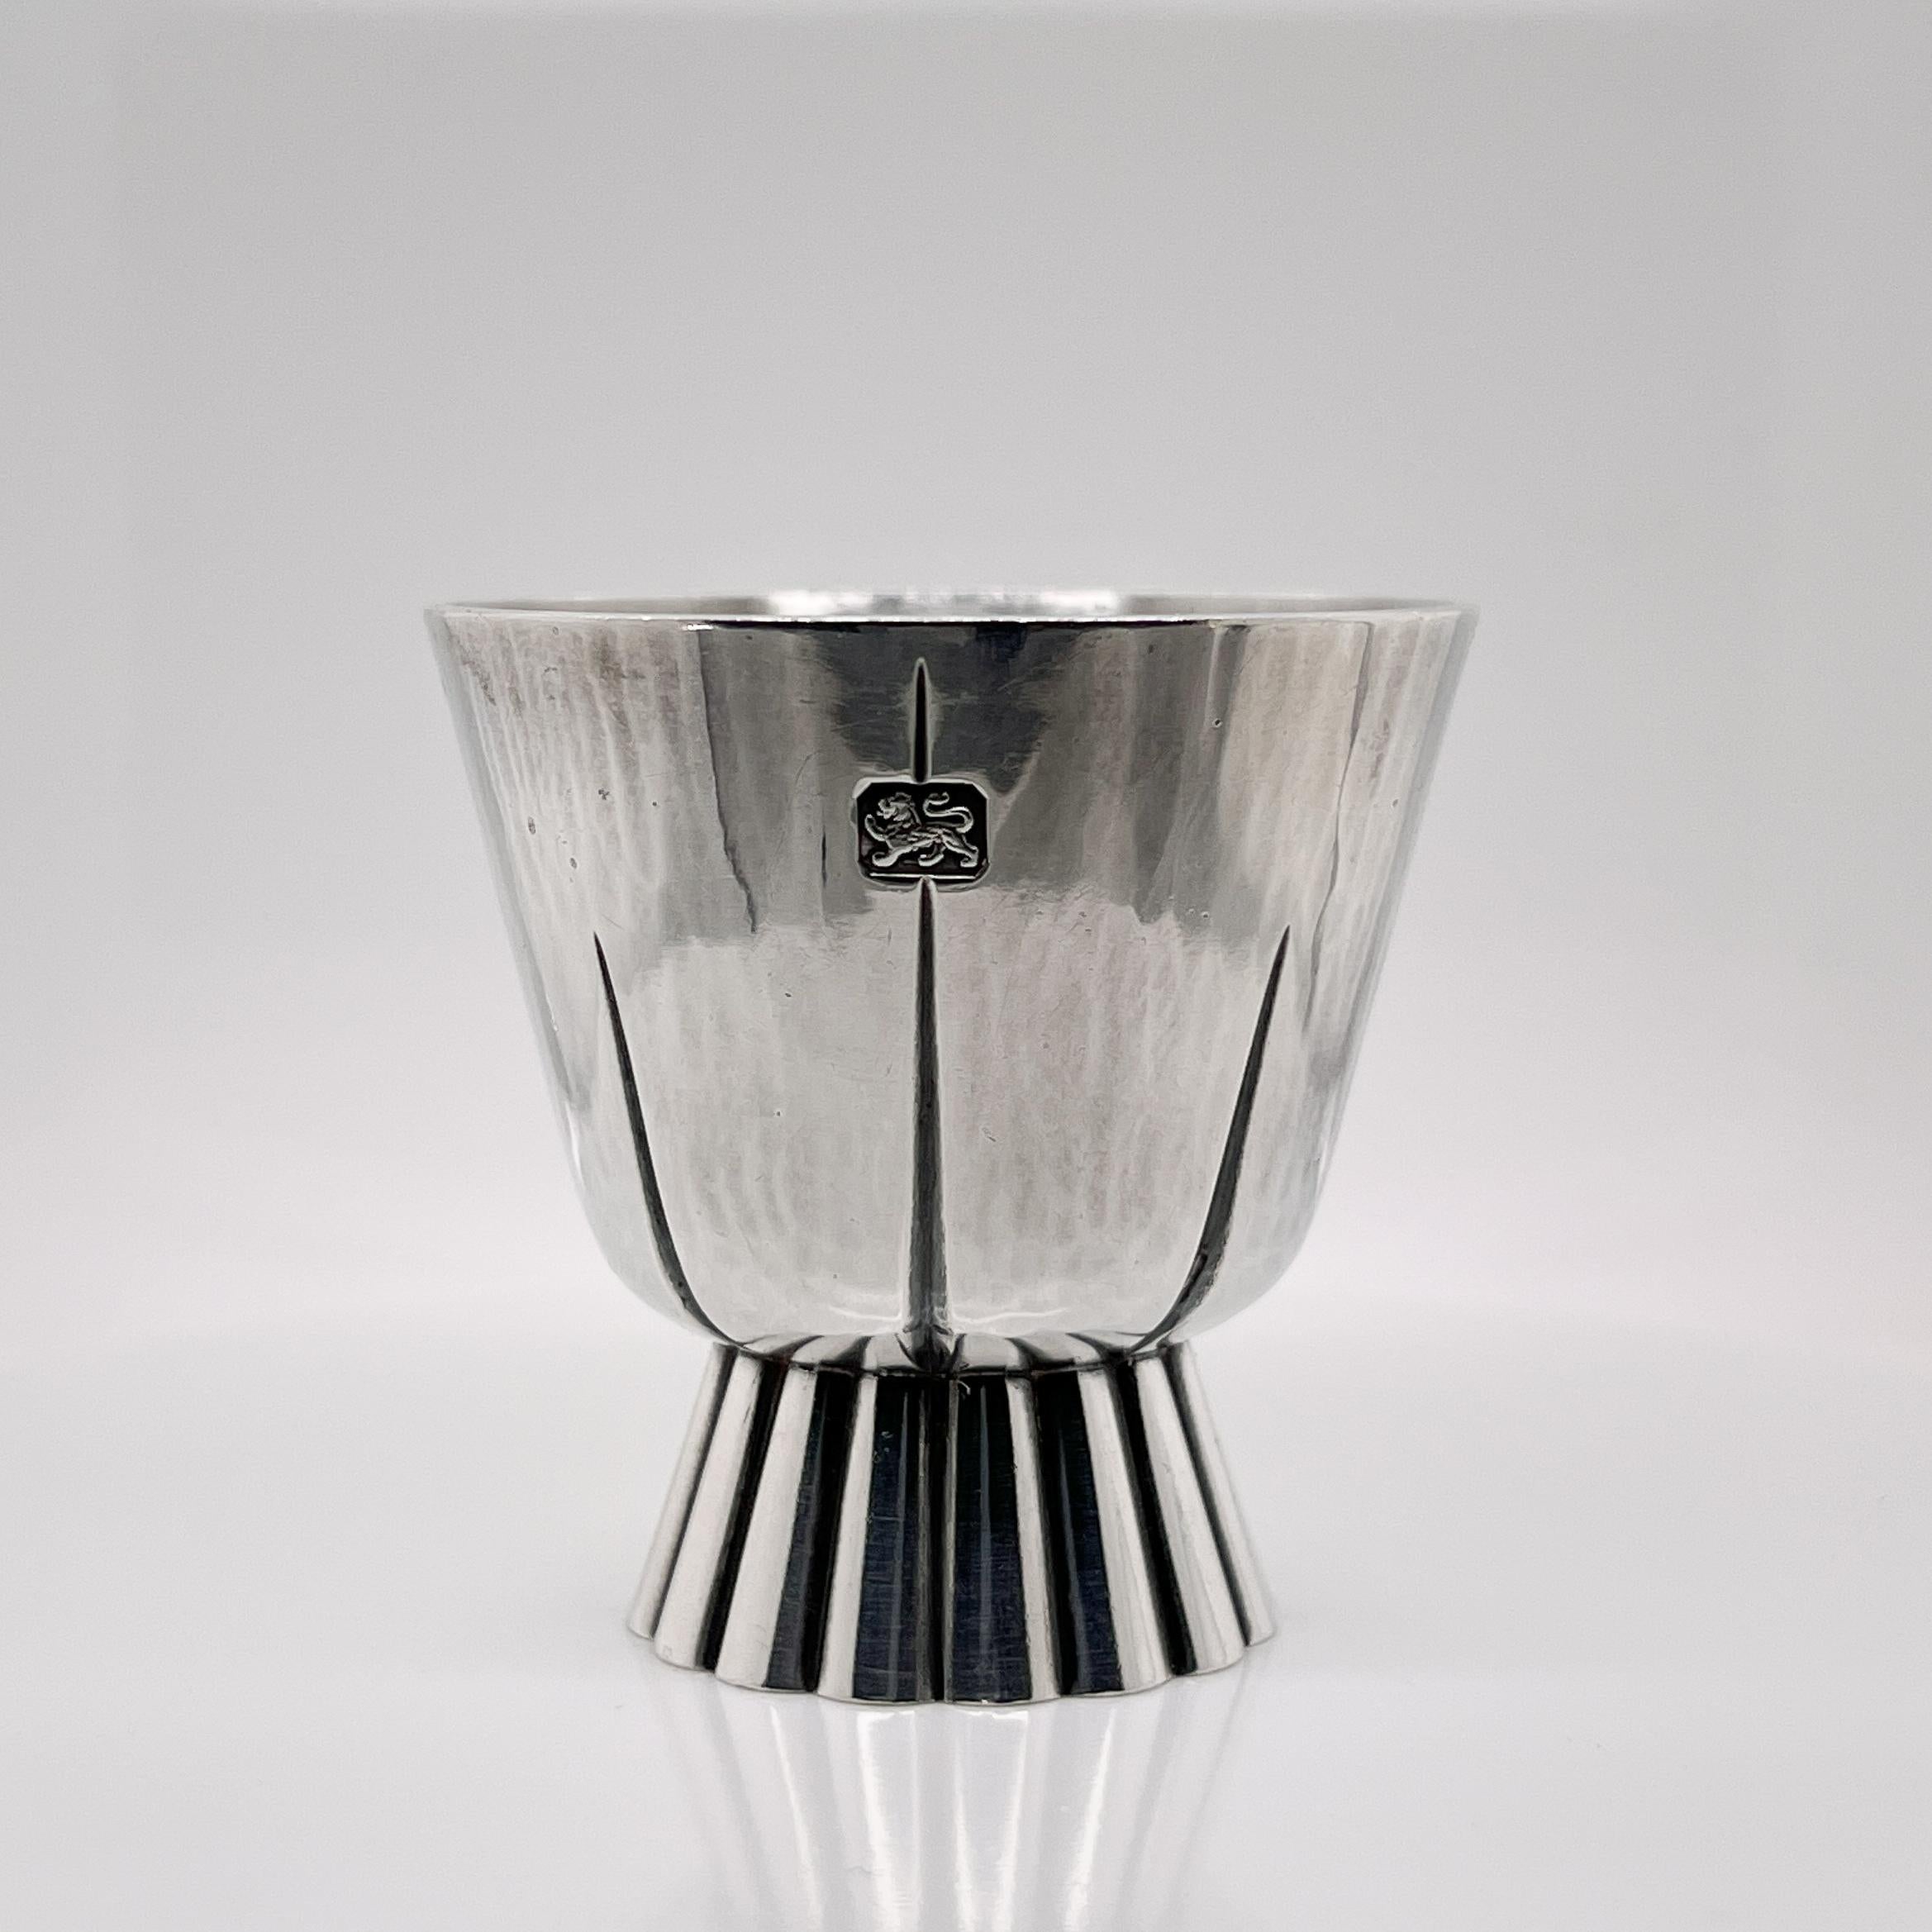 Early English Modernist Gerald Benney Sterling Silver Cordial Cup or Shot Glass For Sale 1